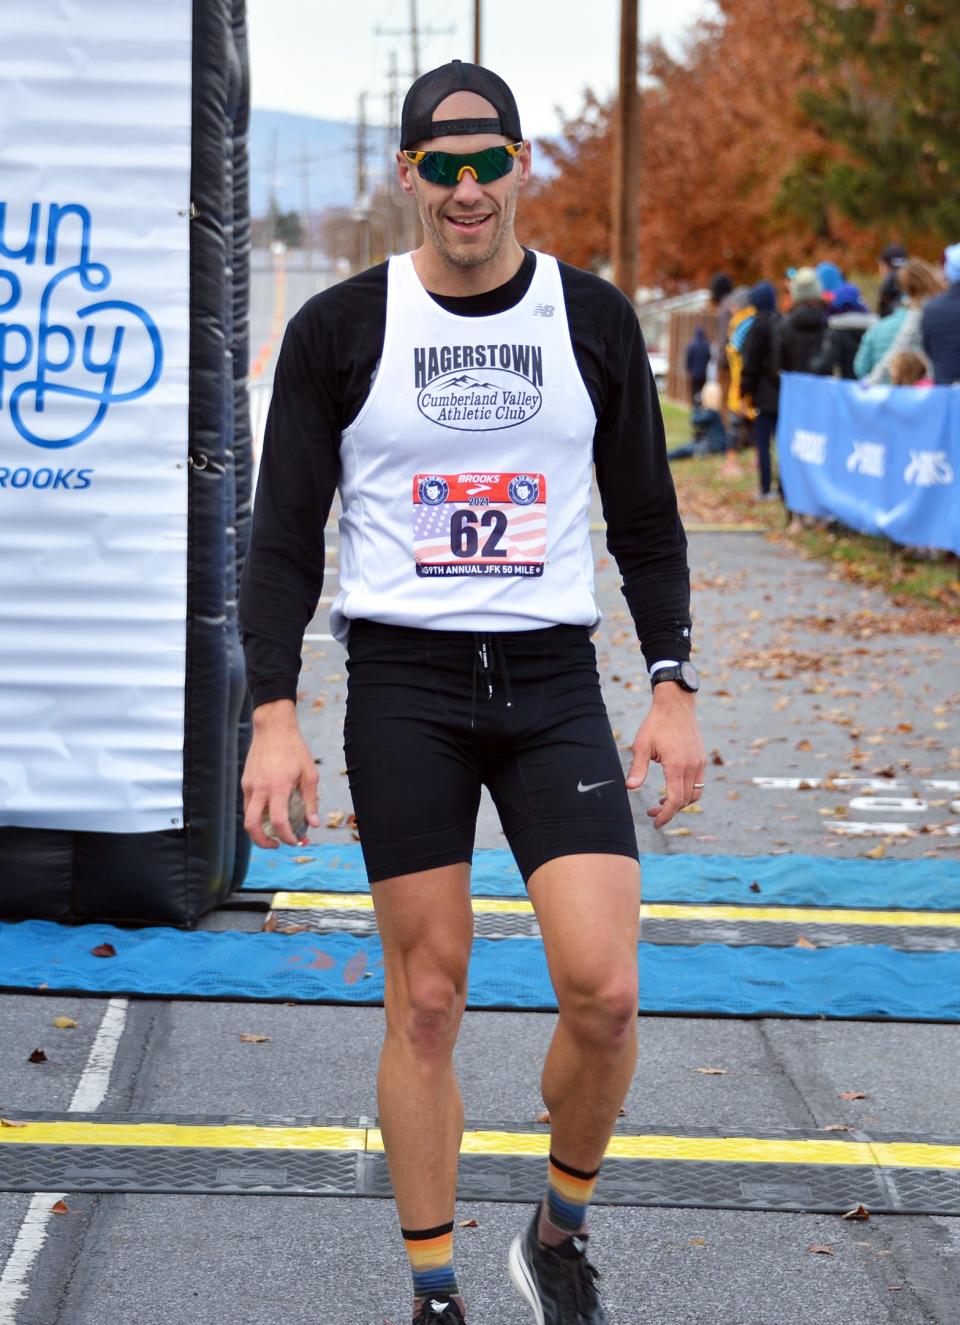 Bryan Seifarth, of Hagerstown, was the top Washington County finisher at the 59th annual JFK 50 Mile ultramarathon on Nov. 20, 2021. He placed 47th overall in a personal-best time of 7:06:56.